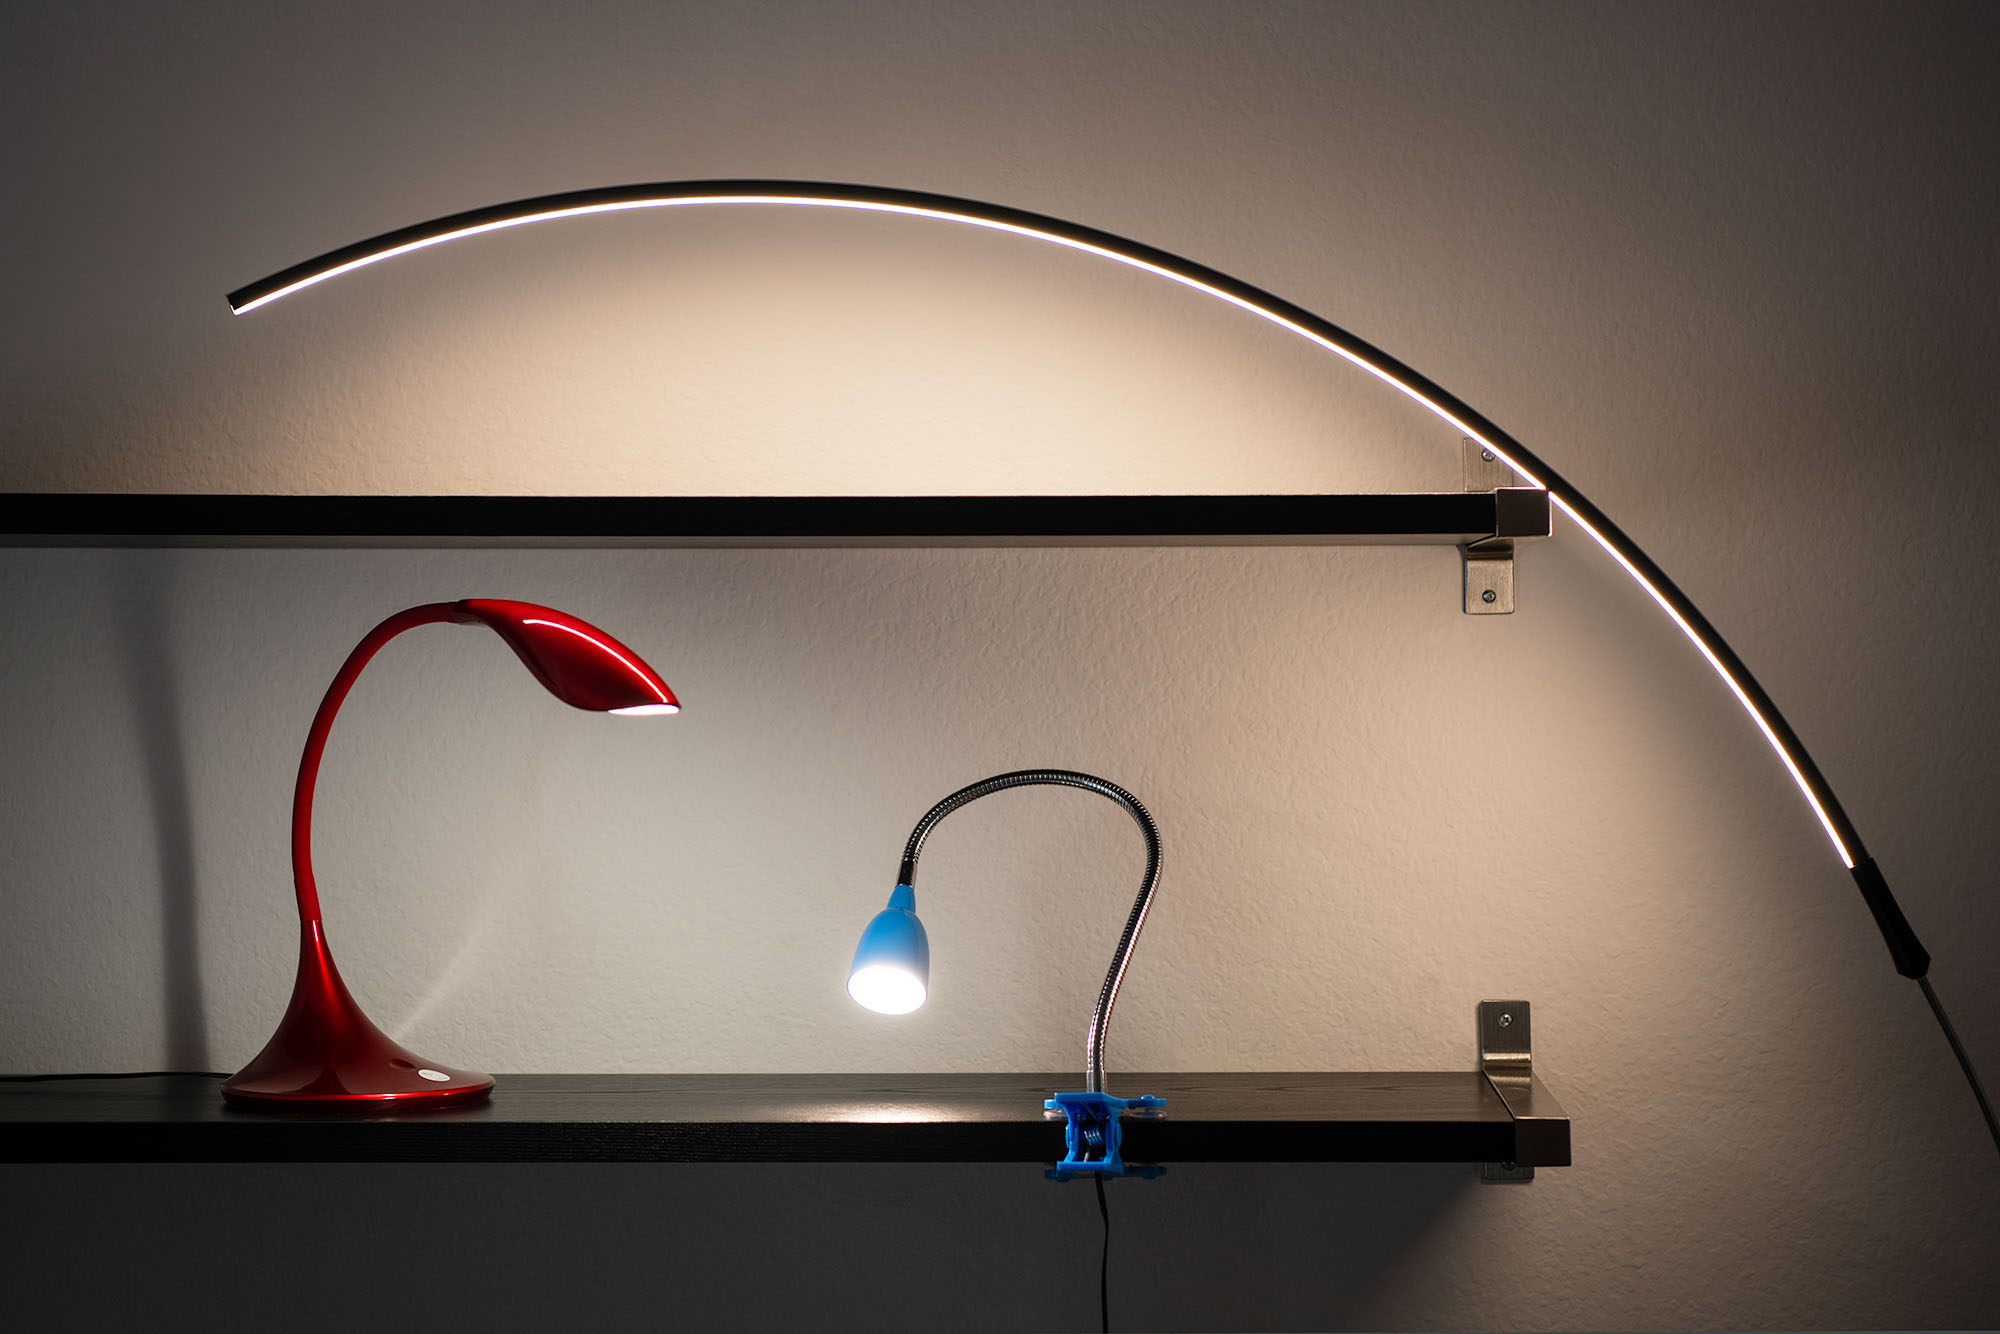 The Best Reading Lamps For Desks Beds, How Bright Should A Reading Lamp Be